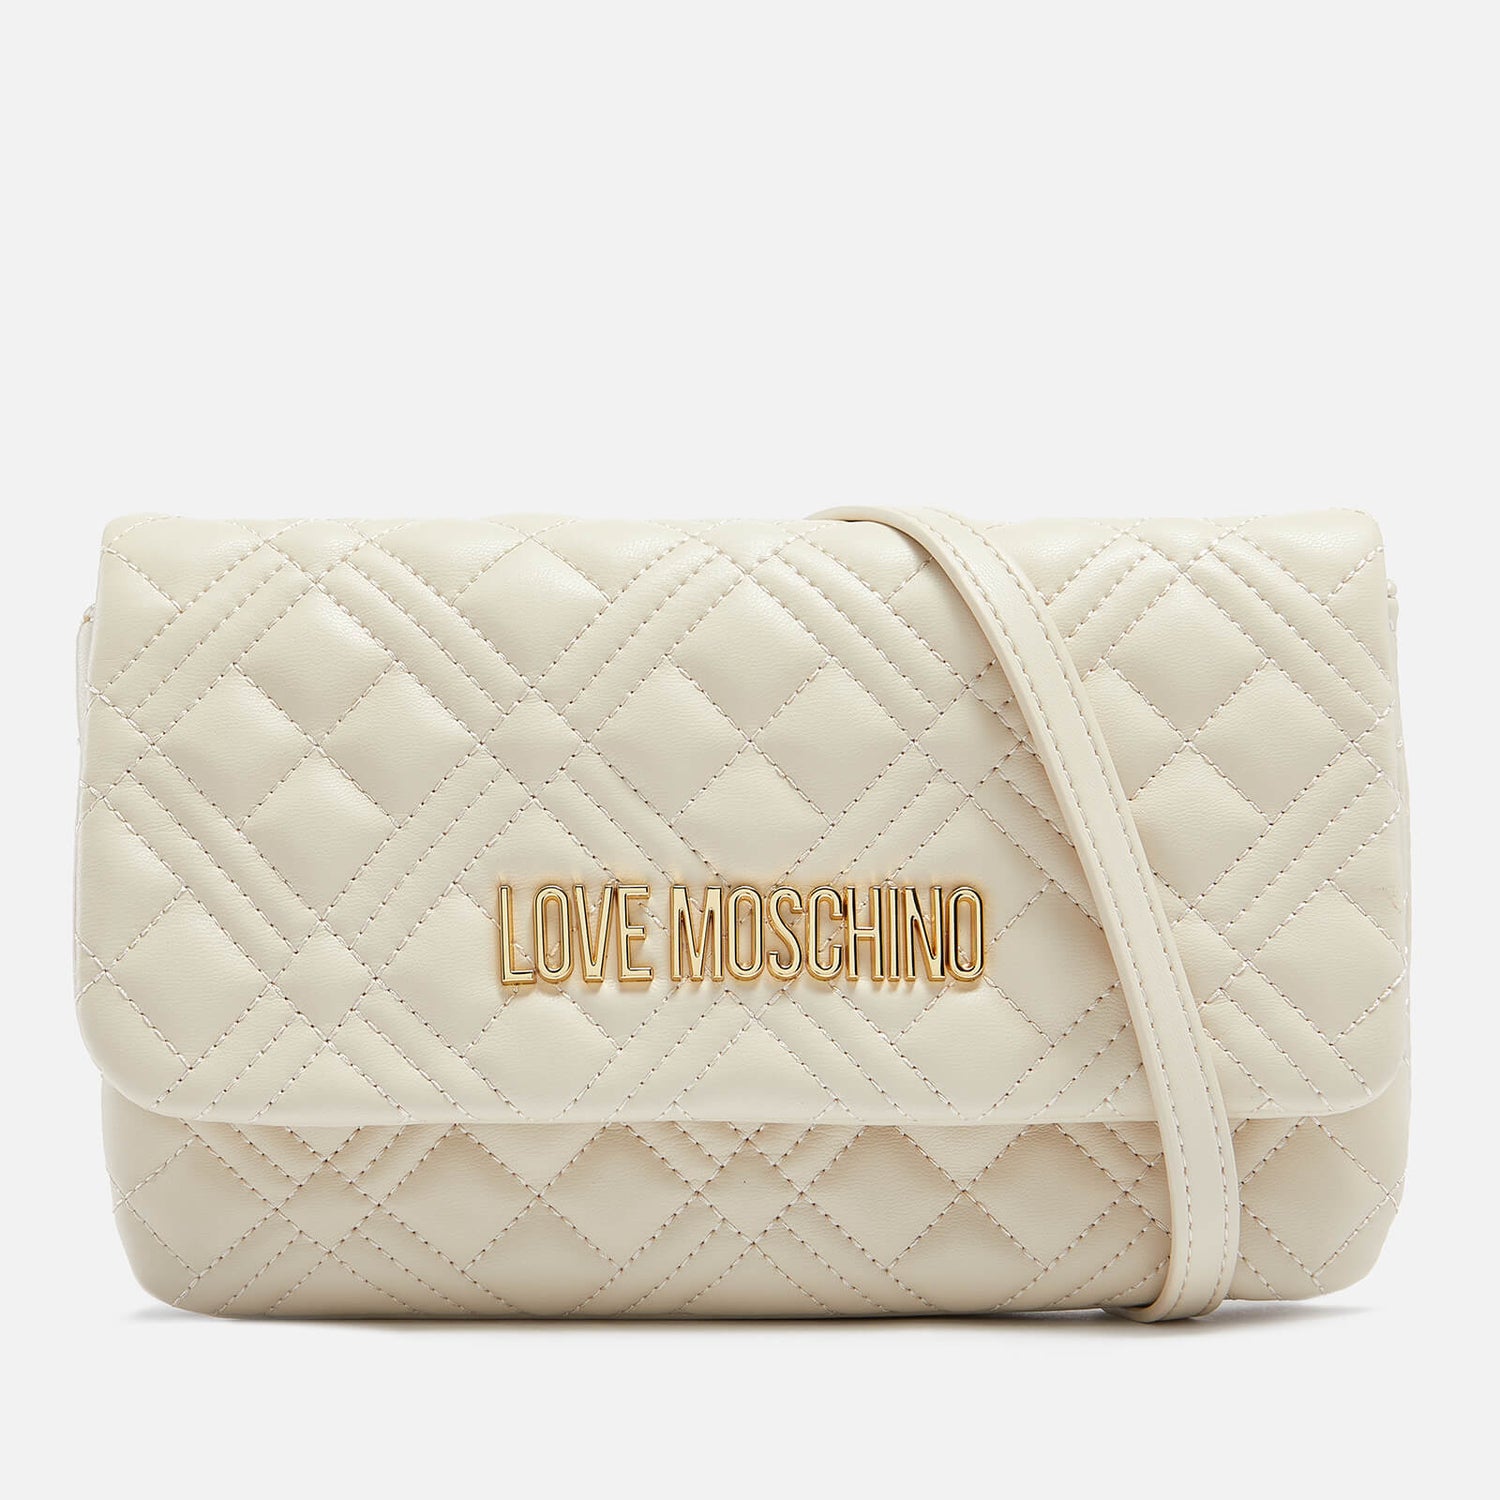 Love Moschino Women's Quilted Chain Flap Cross Body Bag - Ivory